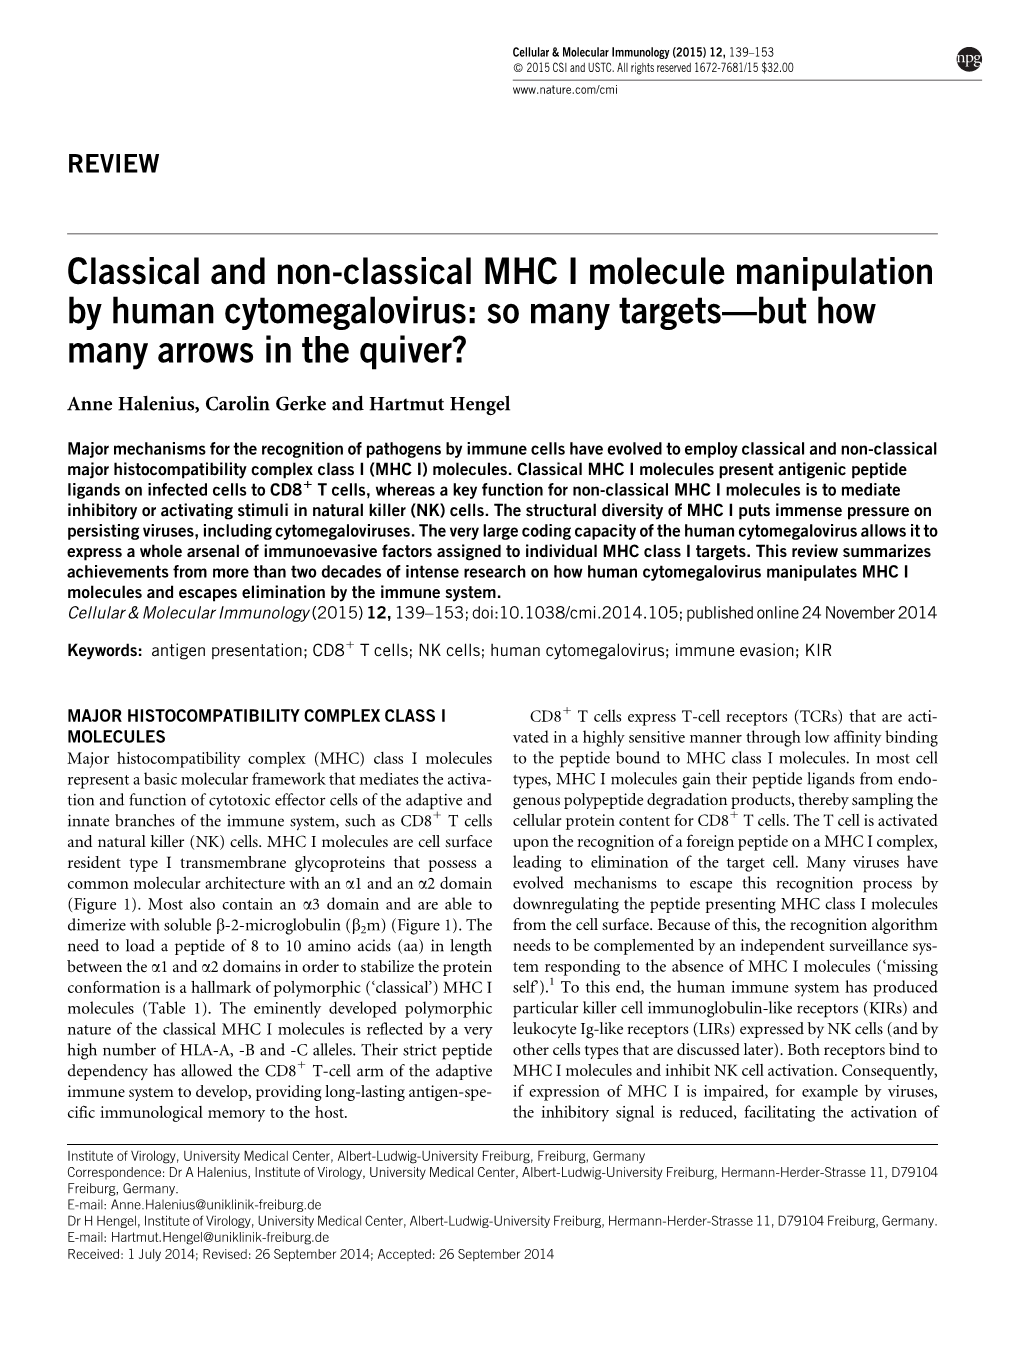 Classical and Non-Classical MHC I Molecule Manipulation by Human Cytomegalovirus: So Many Targets—But How Many Arrows in the Quiver?